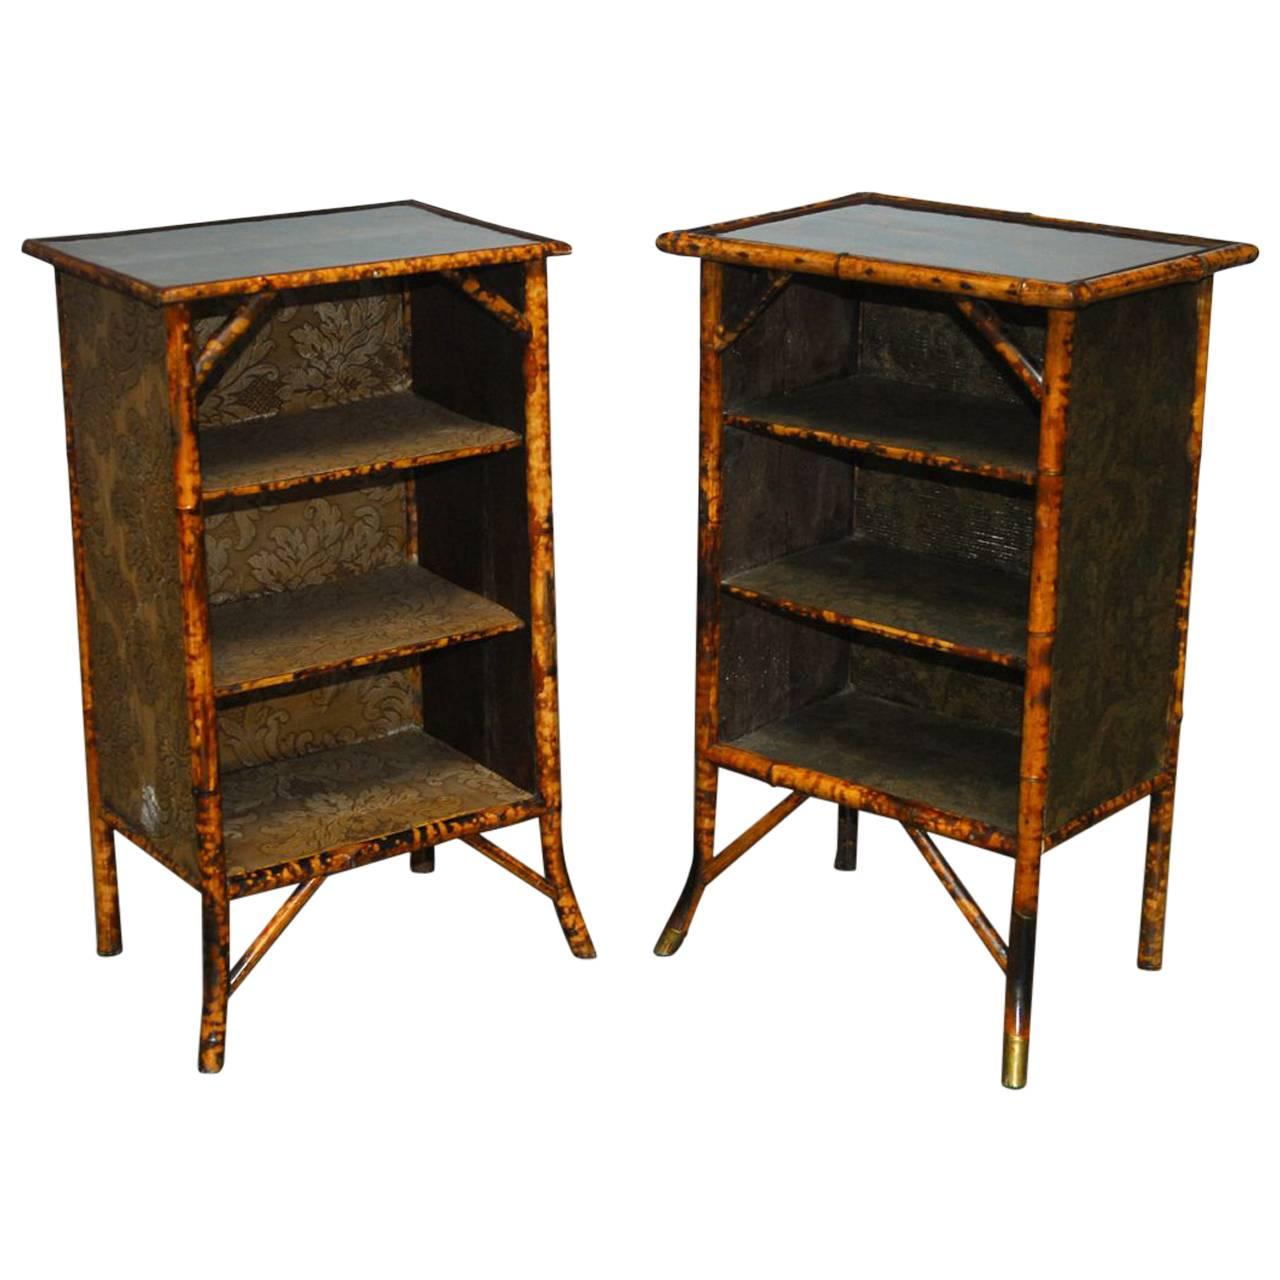 Pair of English Chinoiserie Bookcase Cabinets